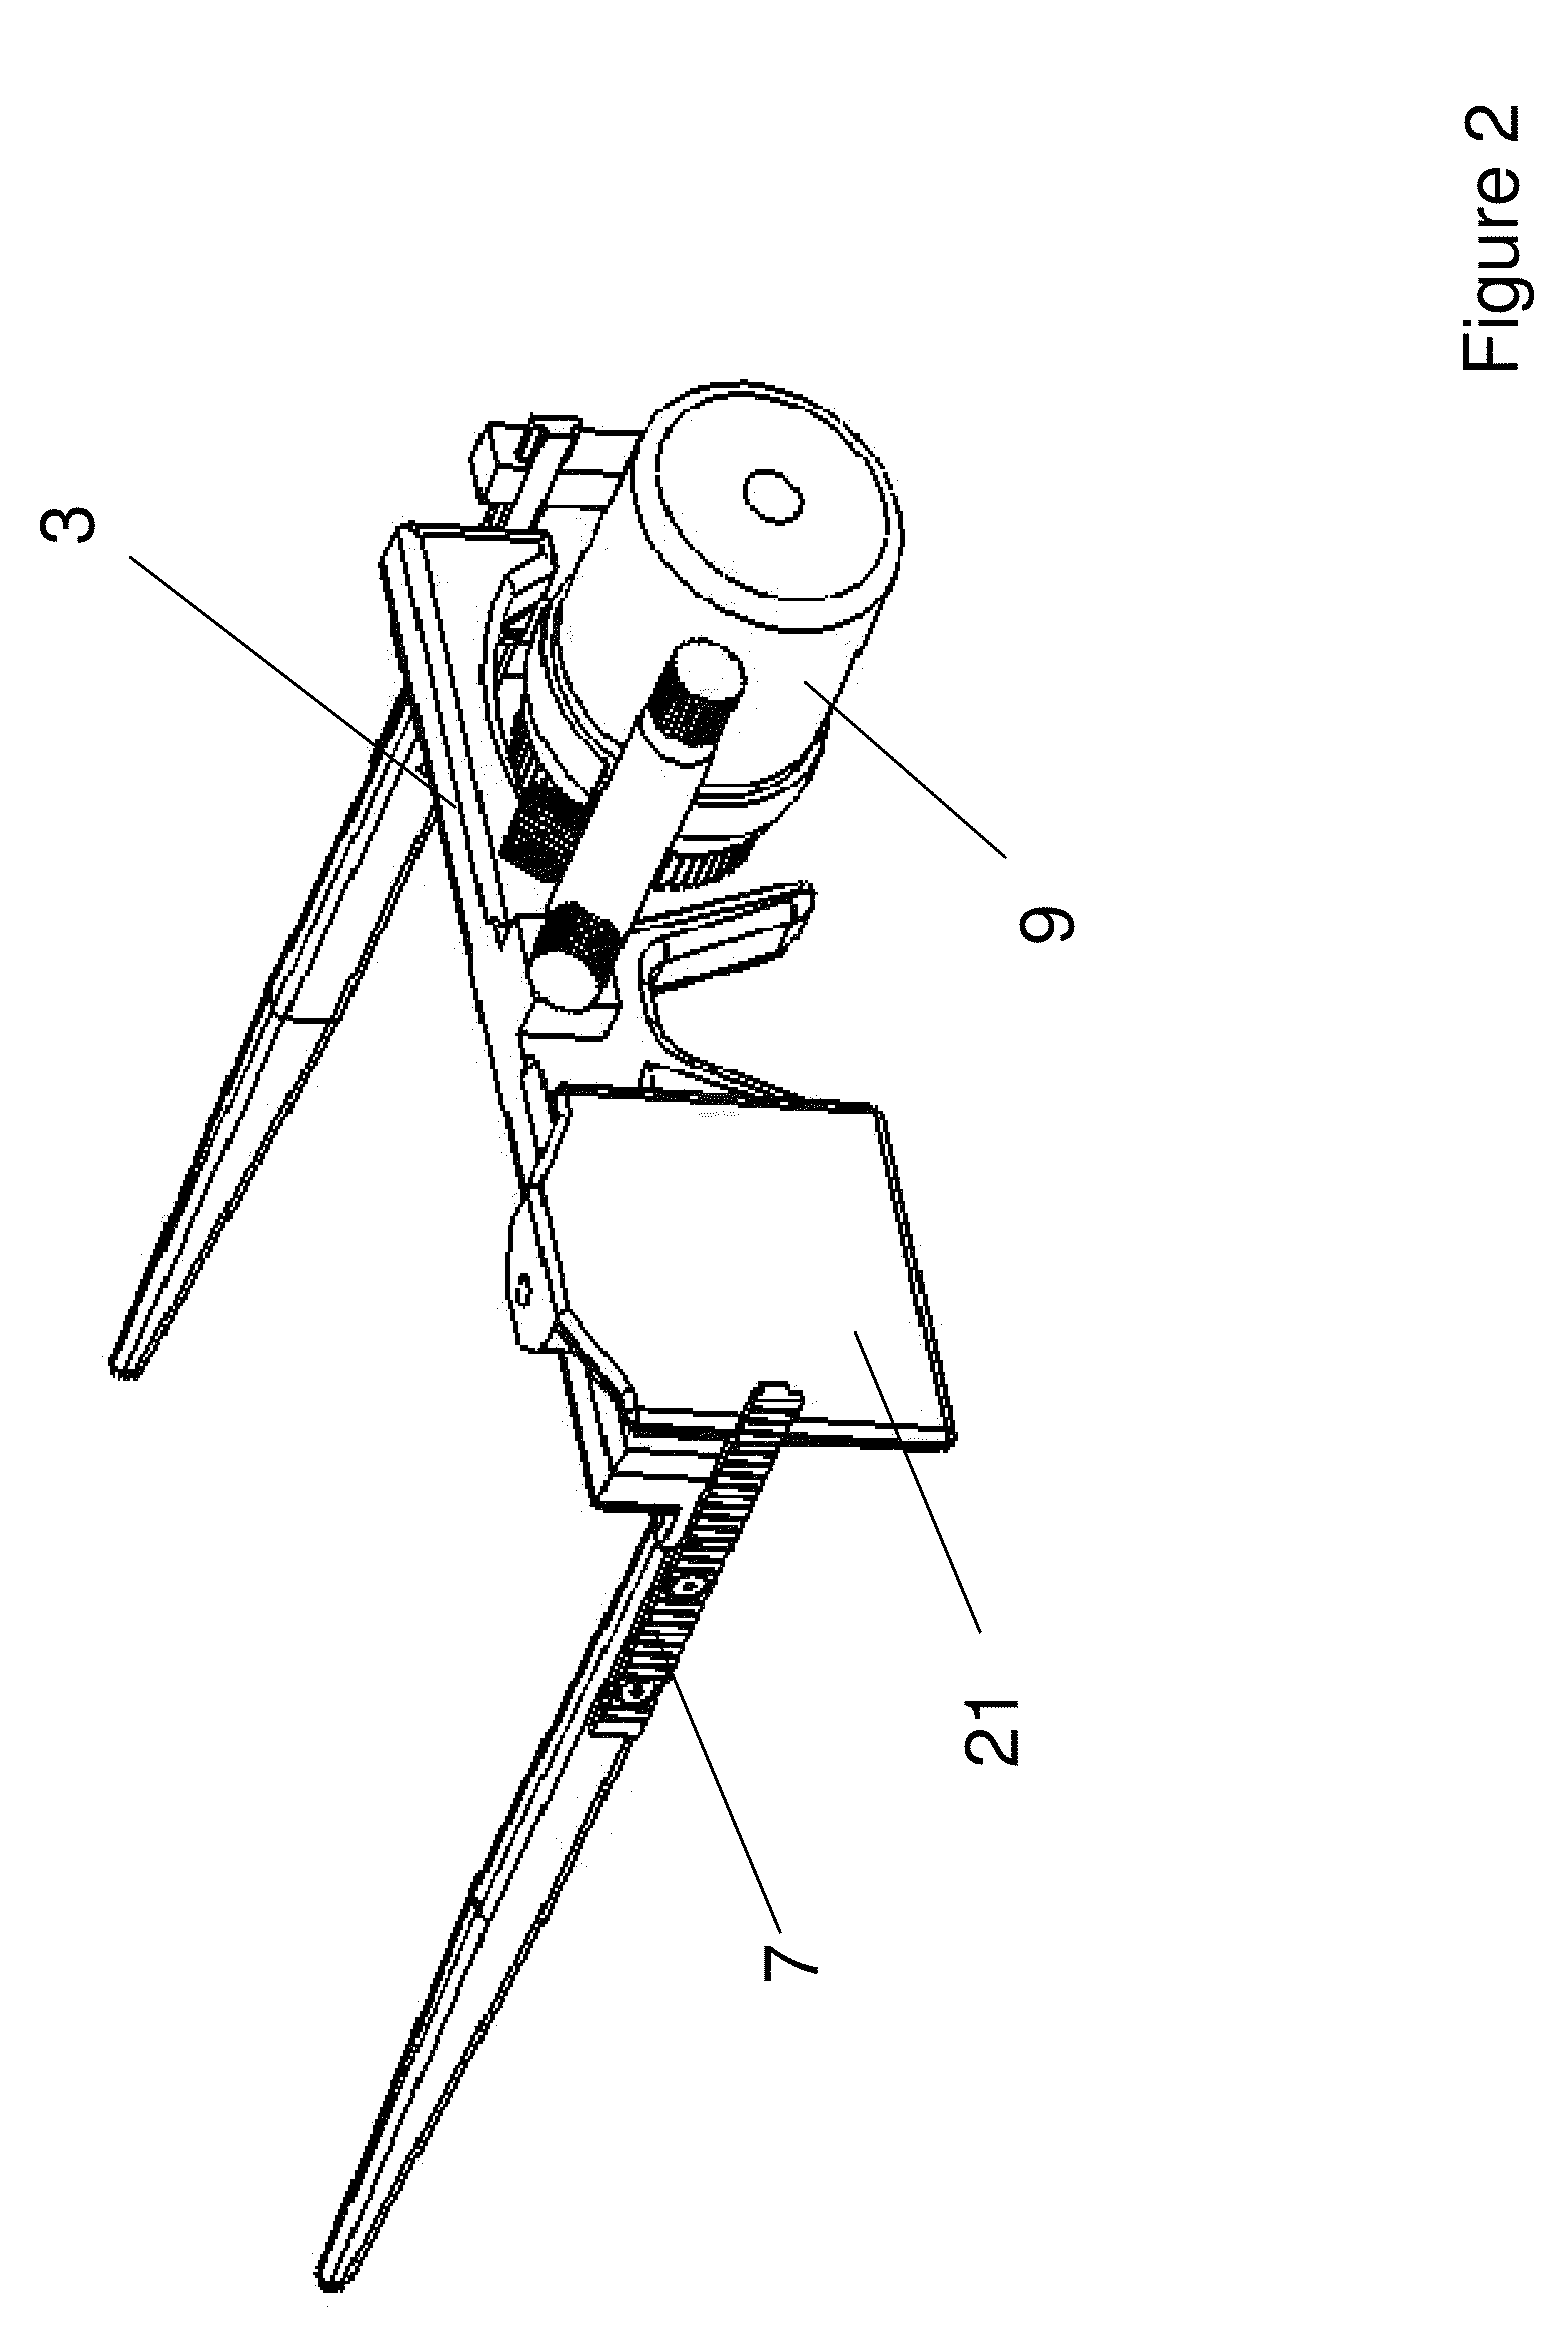 Wearable photoactivator for ocular therapeutic applications and uses thereof